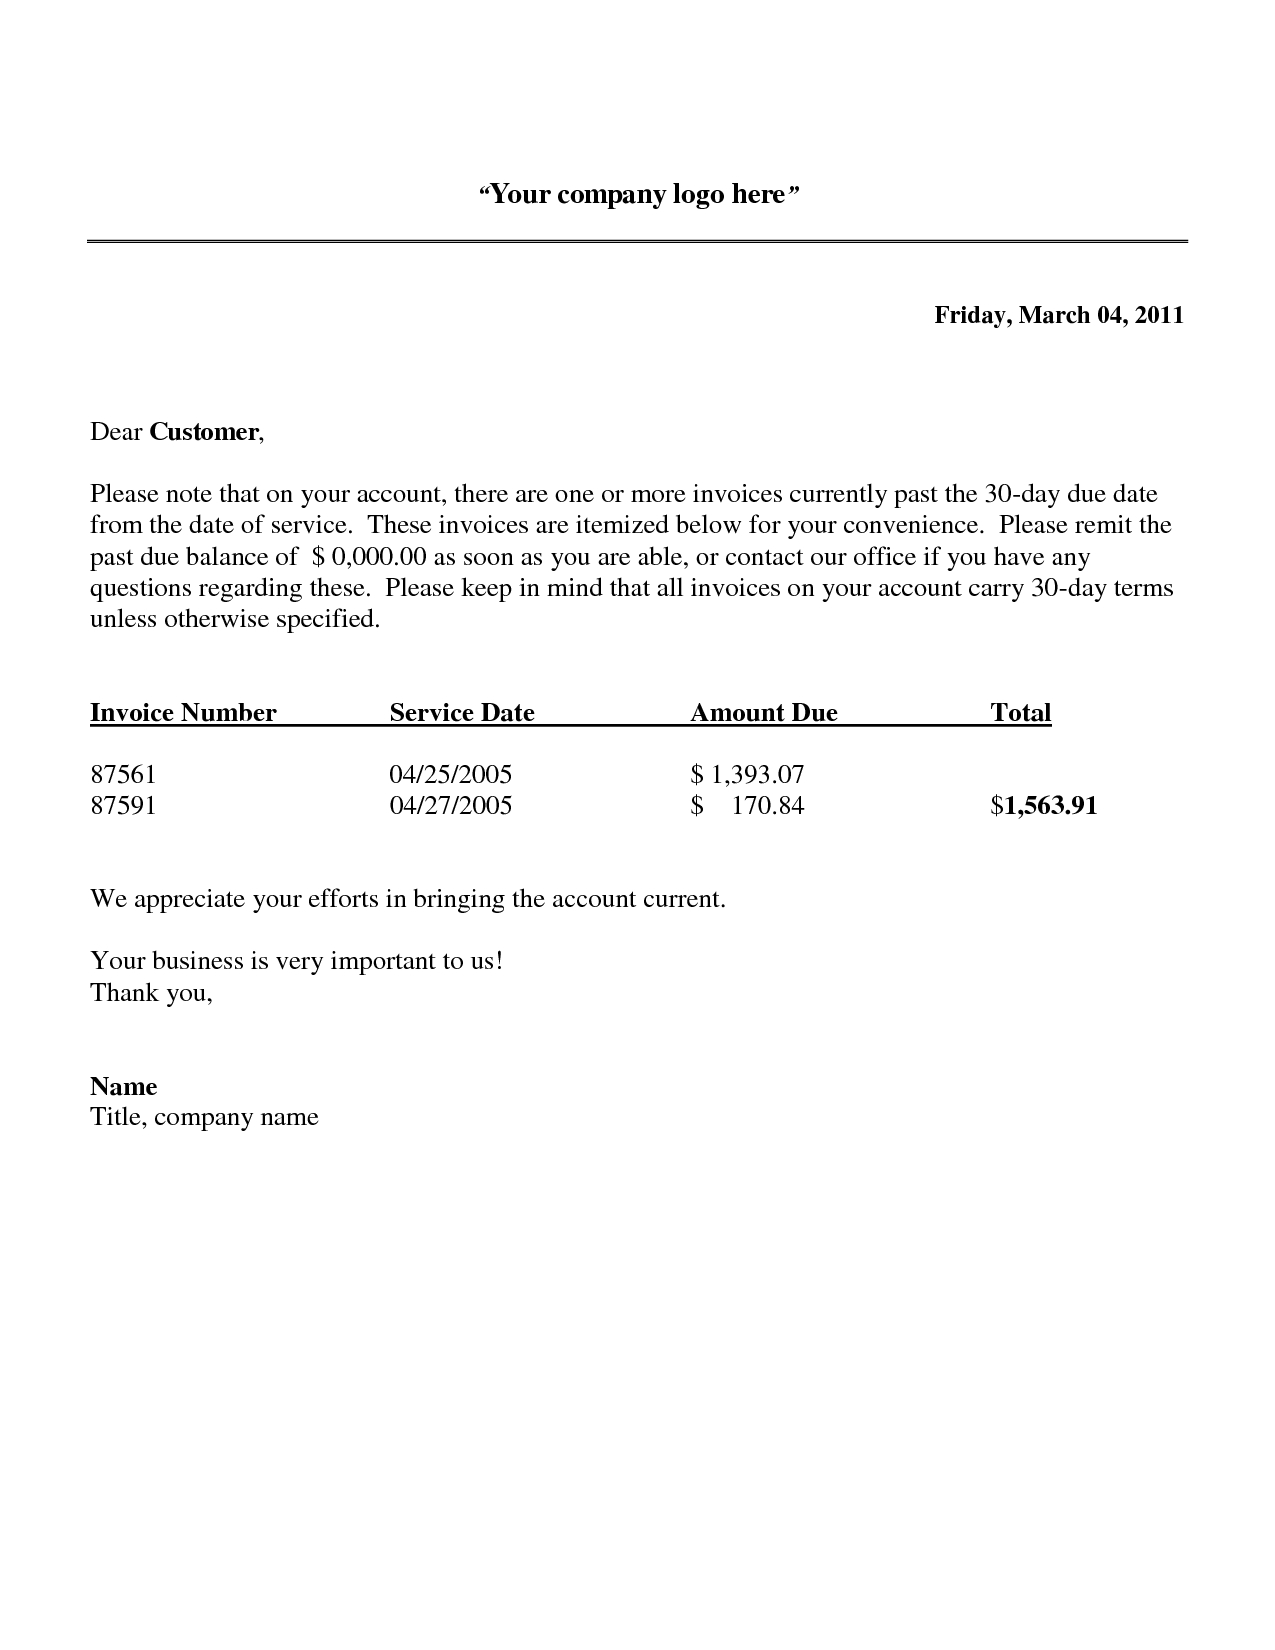 outstanding invoices letter template